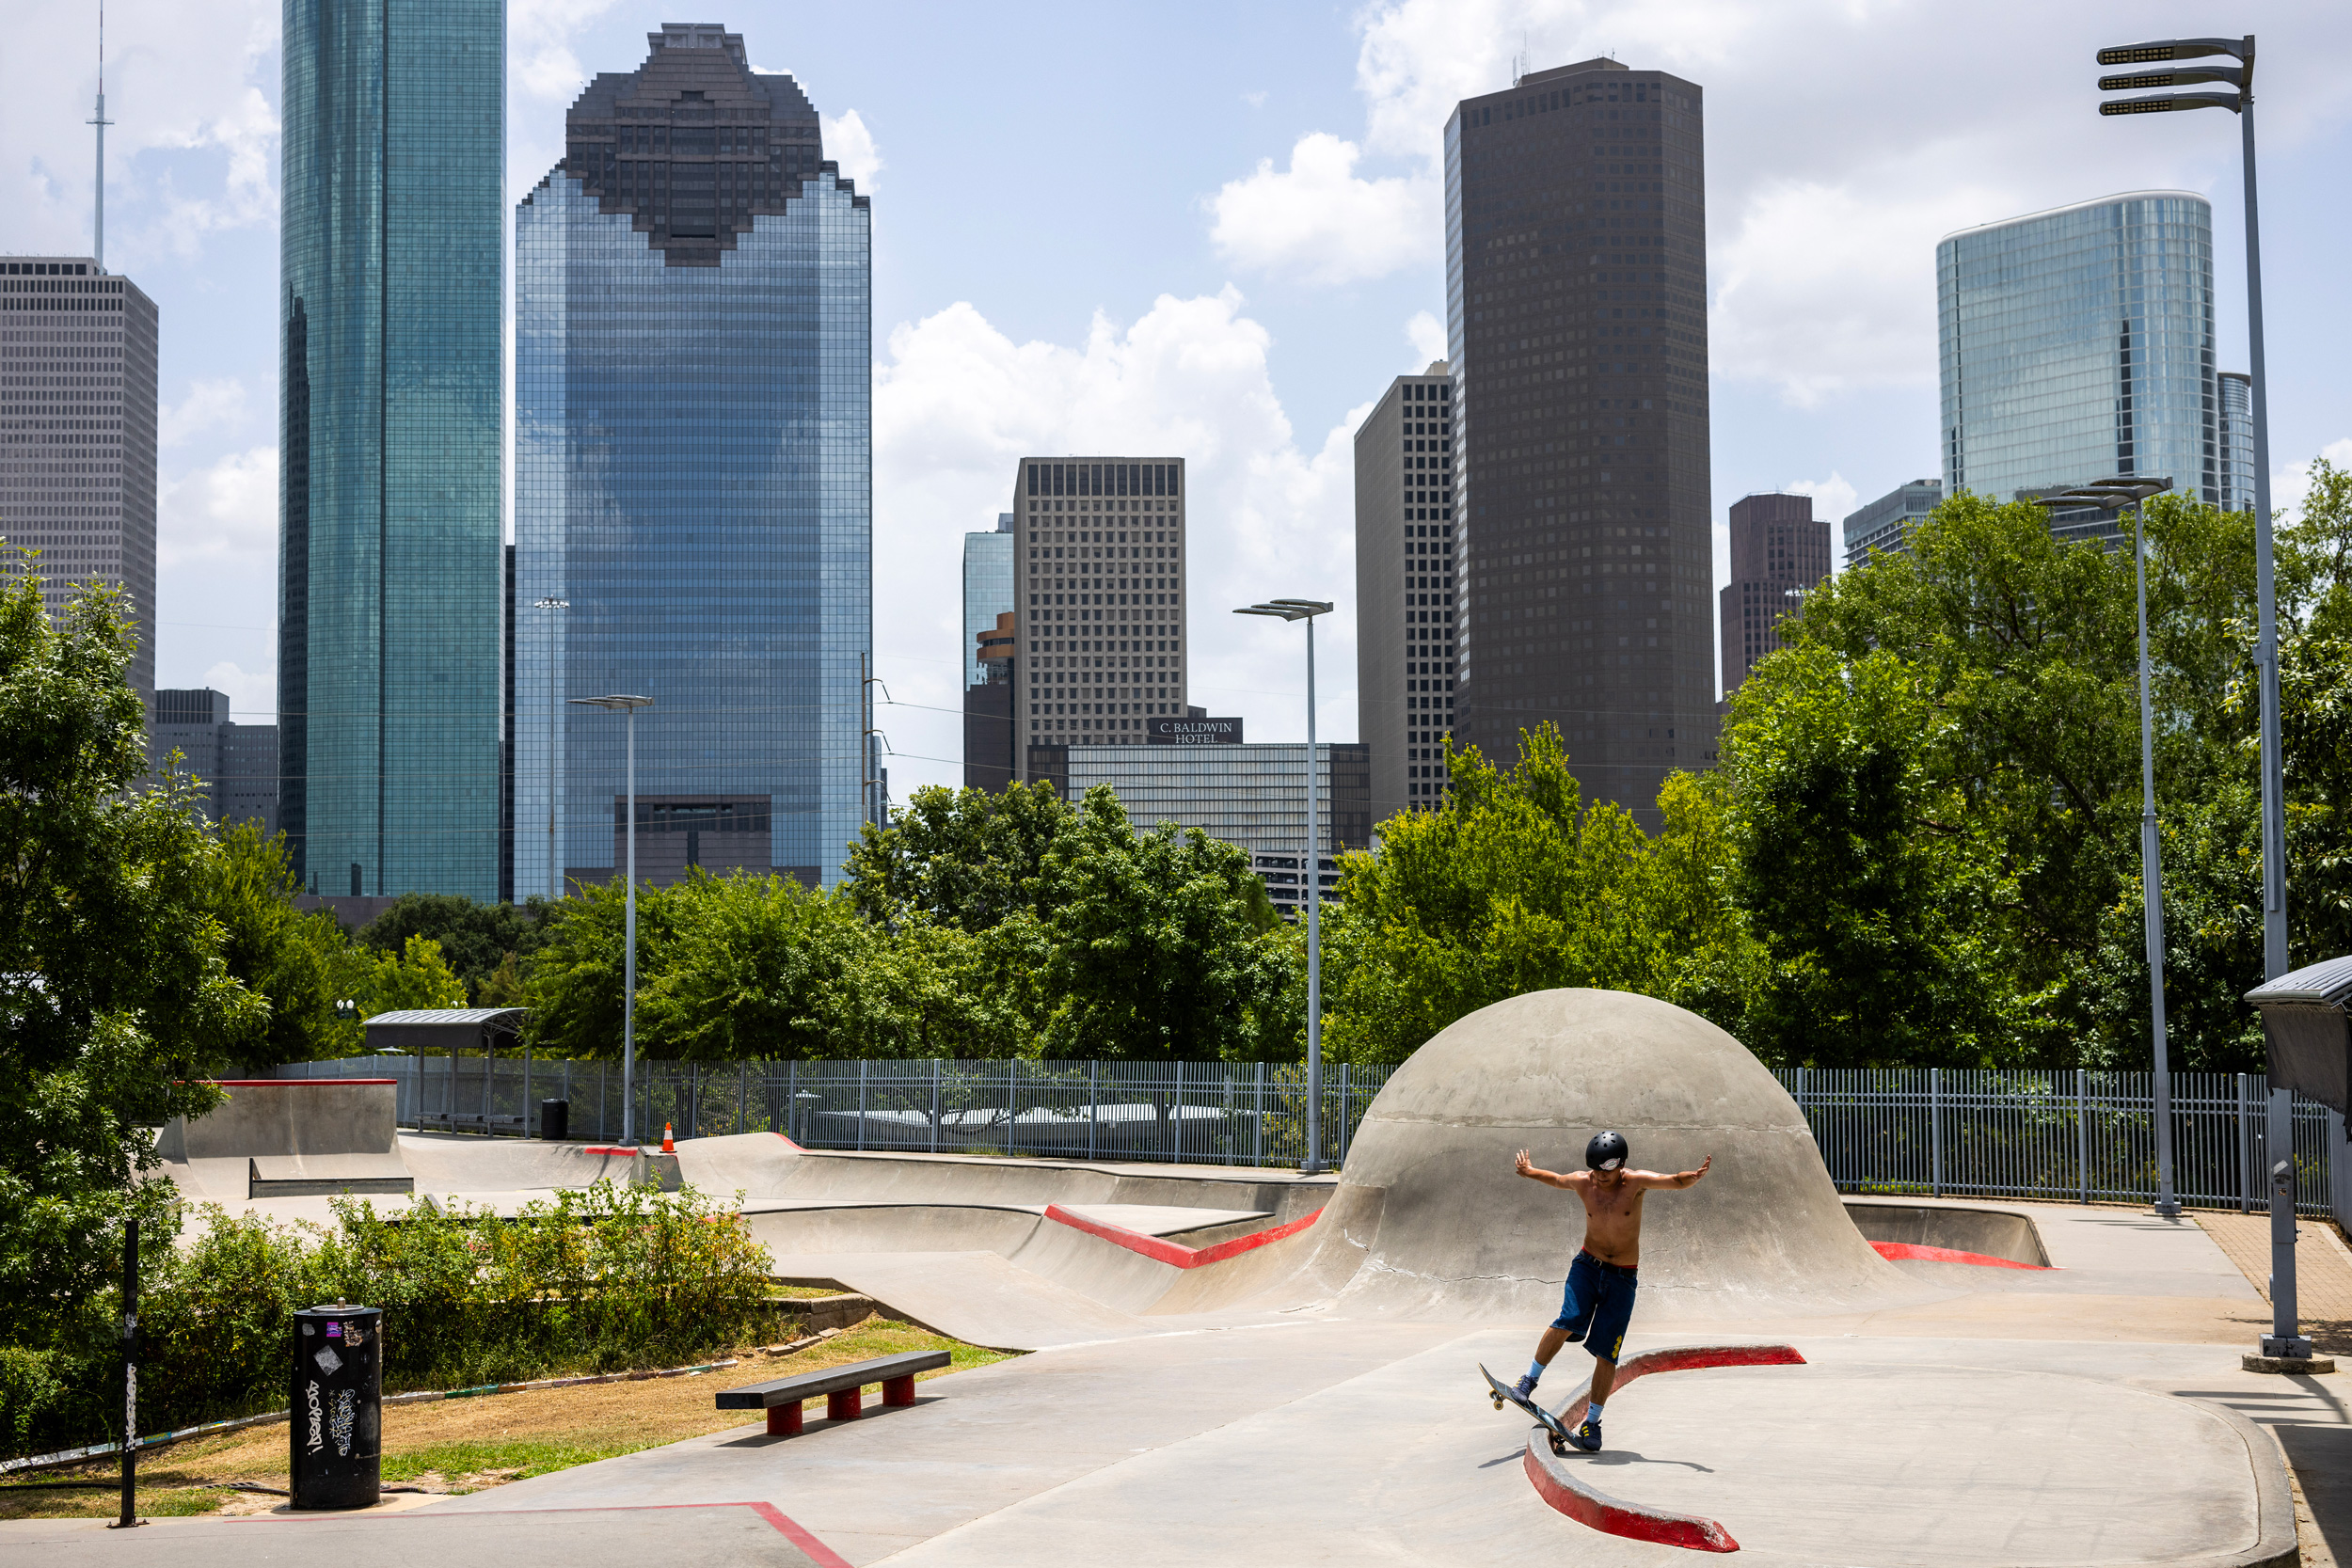 Summer in Houston is here. Get your tips and tricks to beating the heat.